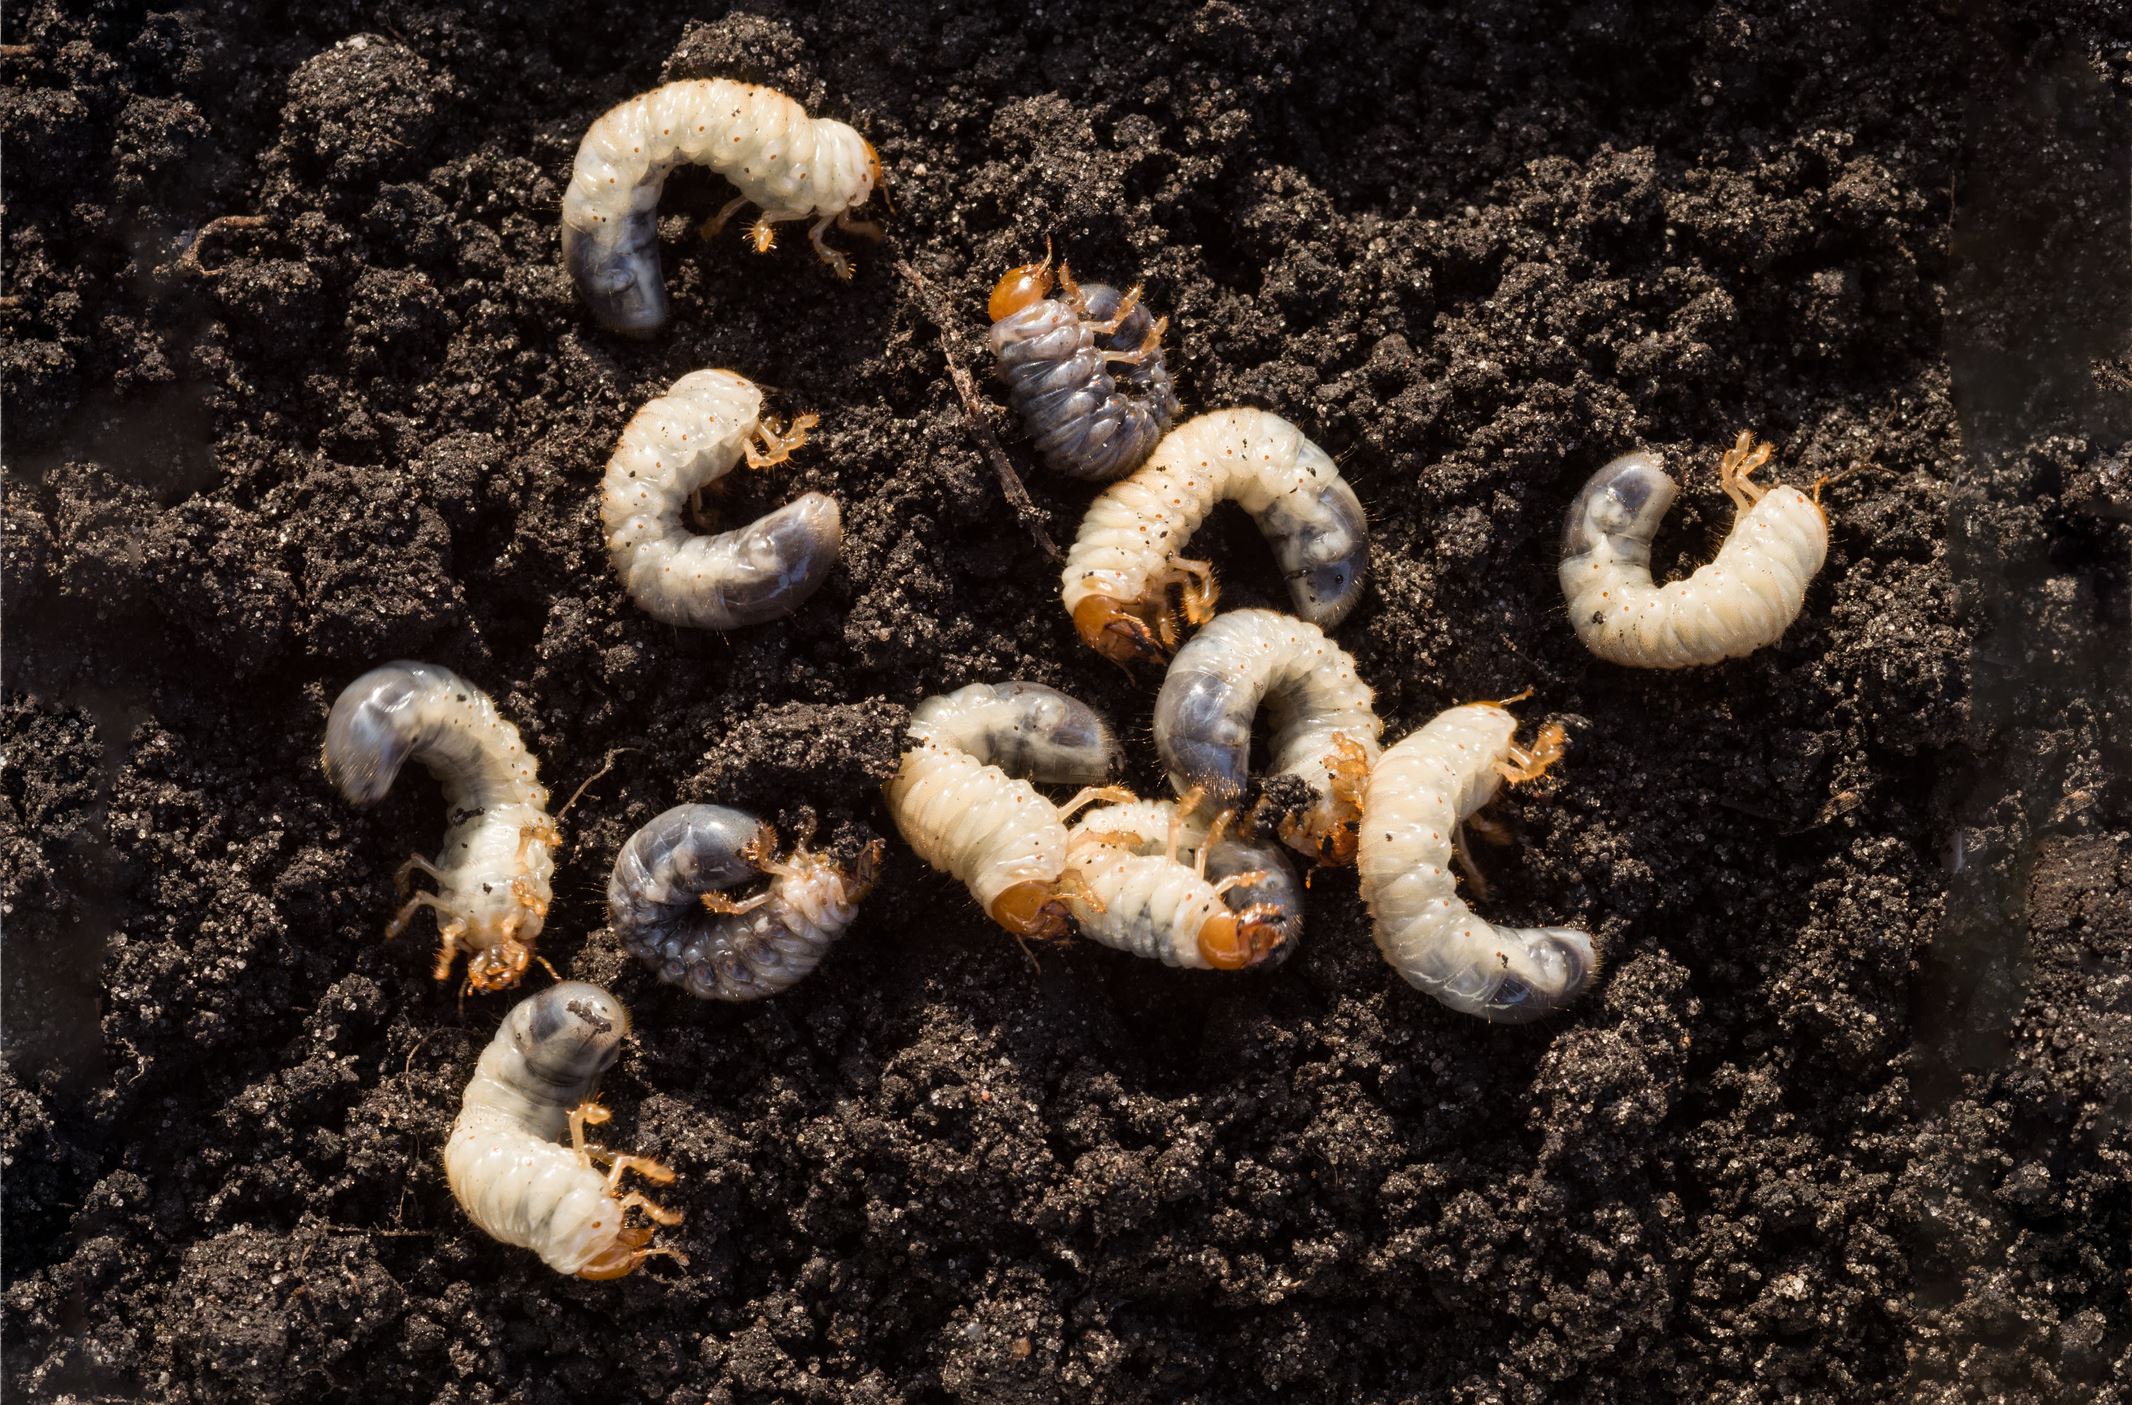 What Should I Know About Grubs?